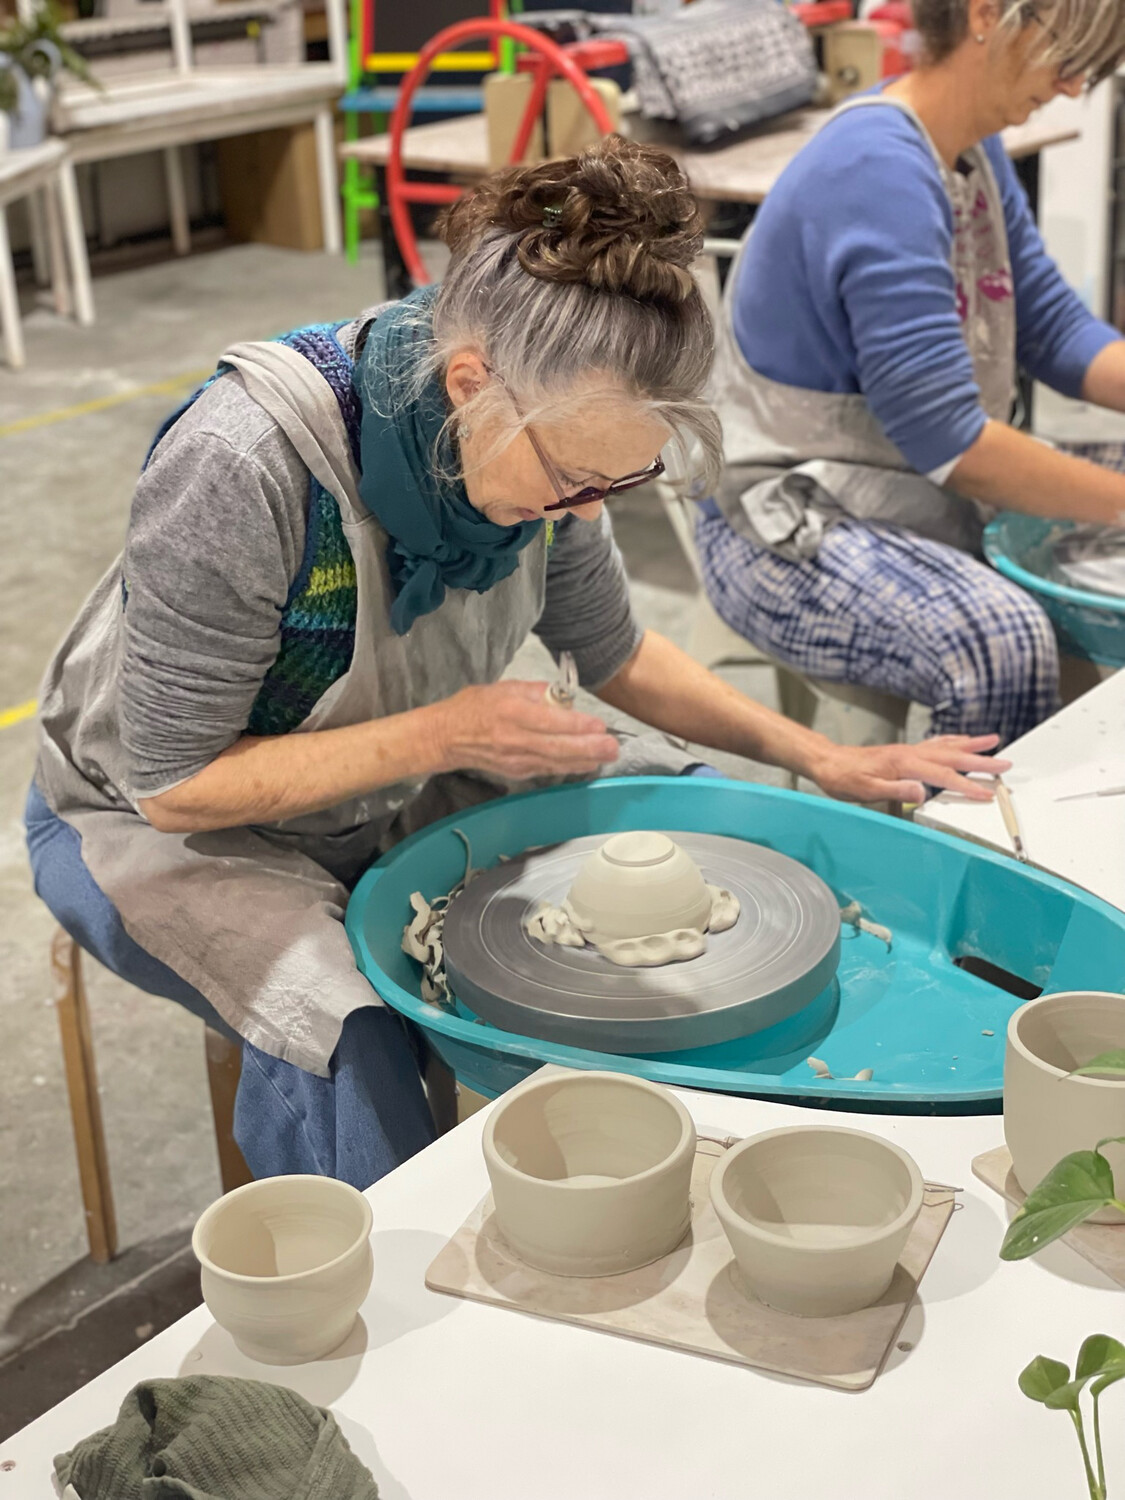 Slip, Spin & Sculpt! 4 week clay course, Sat 22nd Oct, 1-3pm